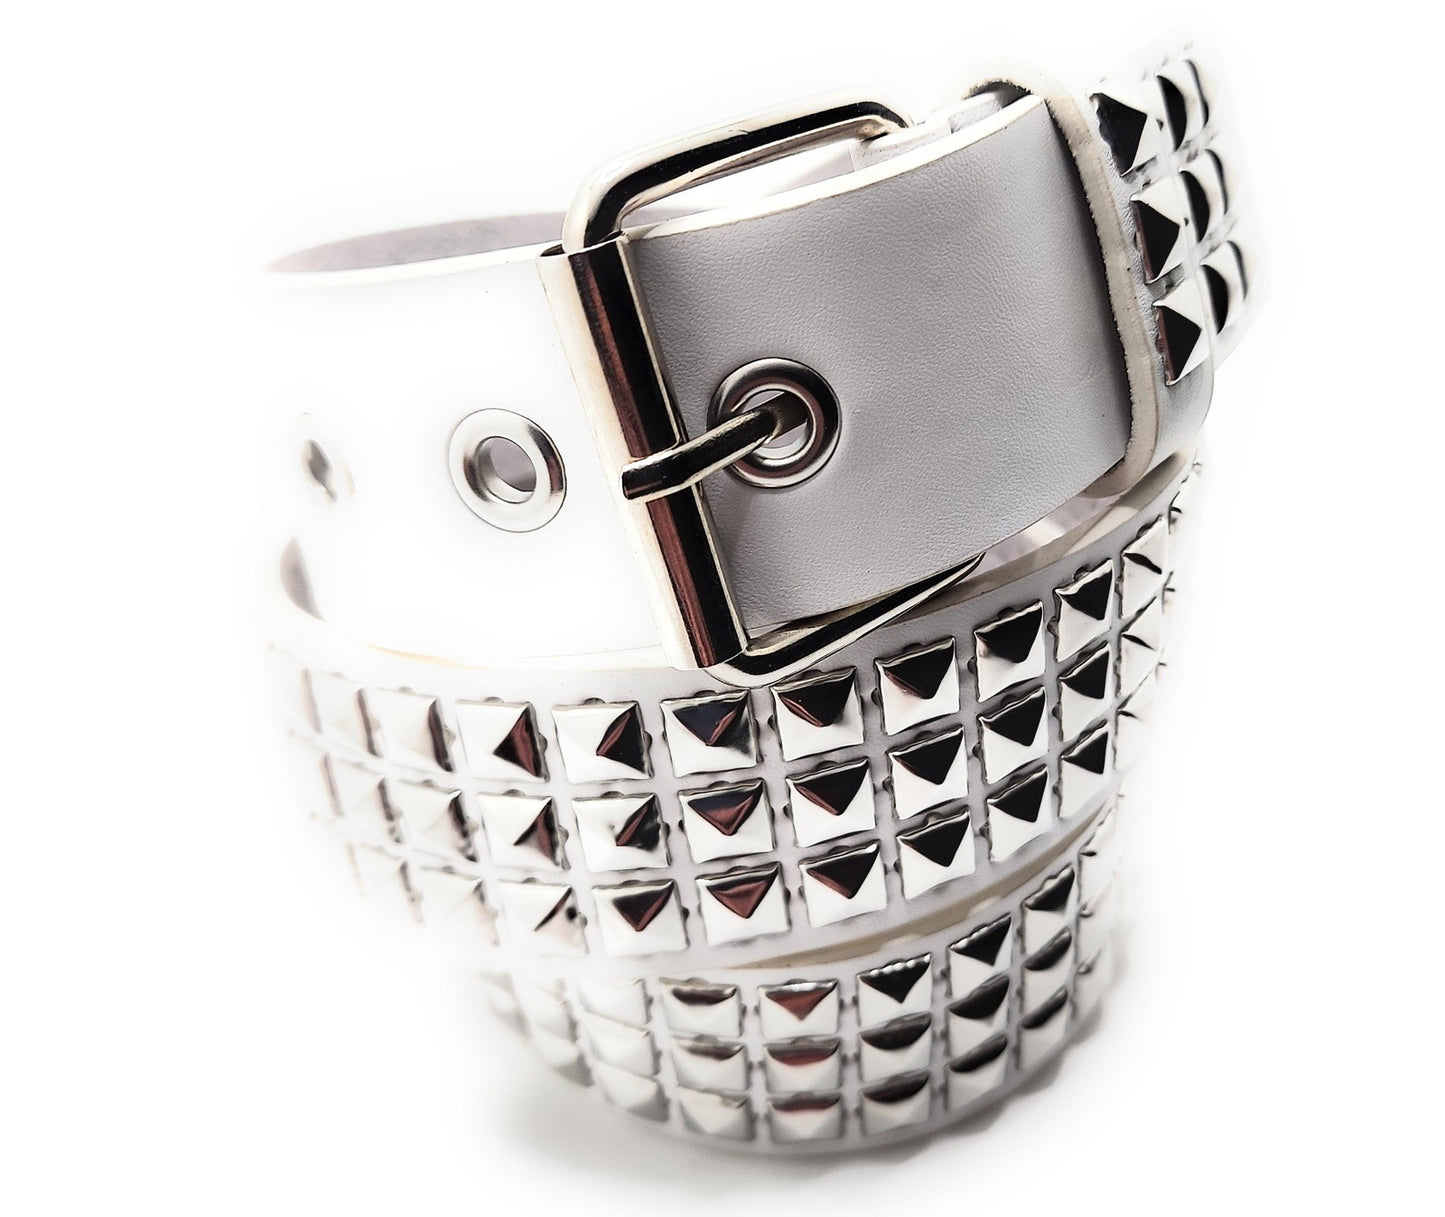 Silver on White Studded Belt Trim-to-Fit Punk